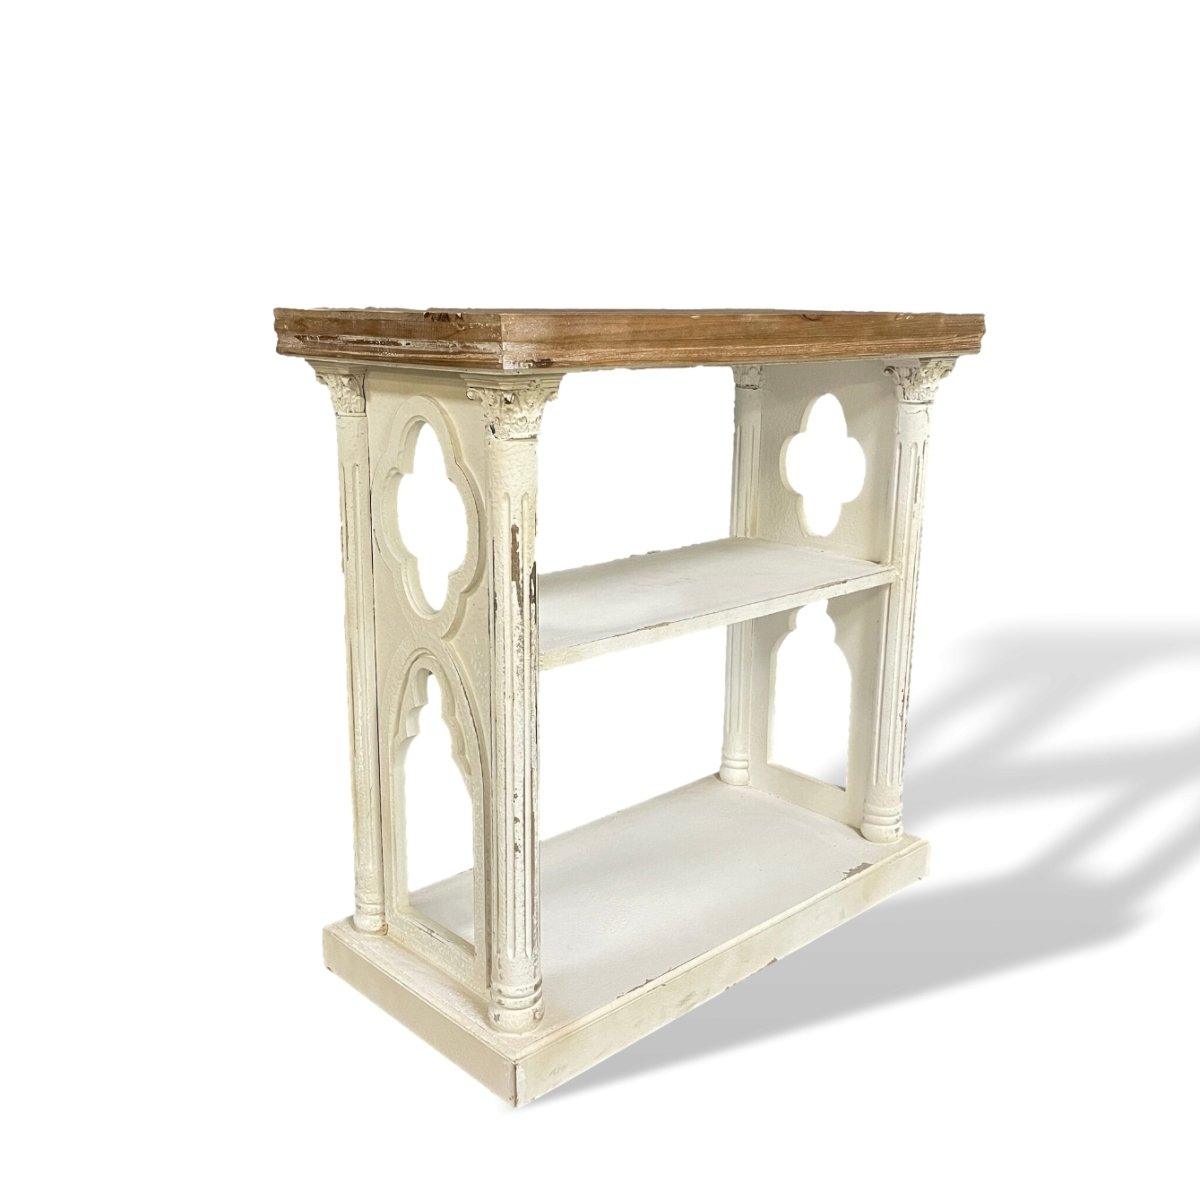 Jack Distressed White Wood Console Table - Rustic Furniture Outlet